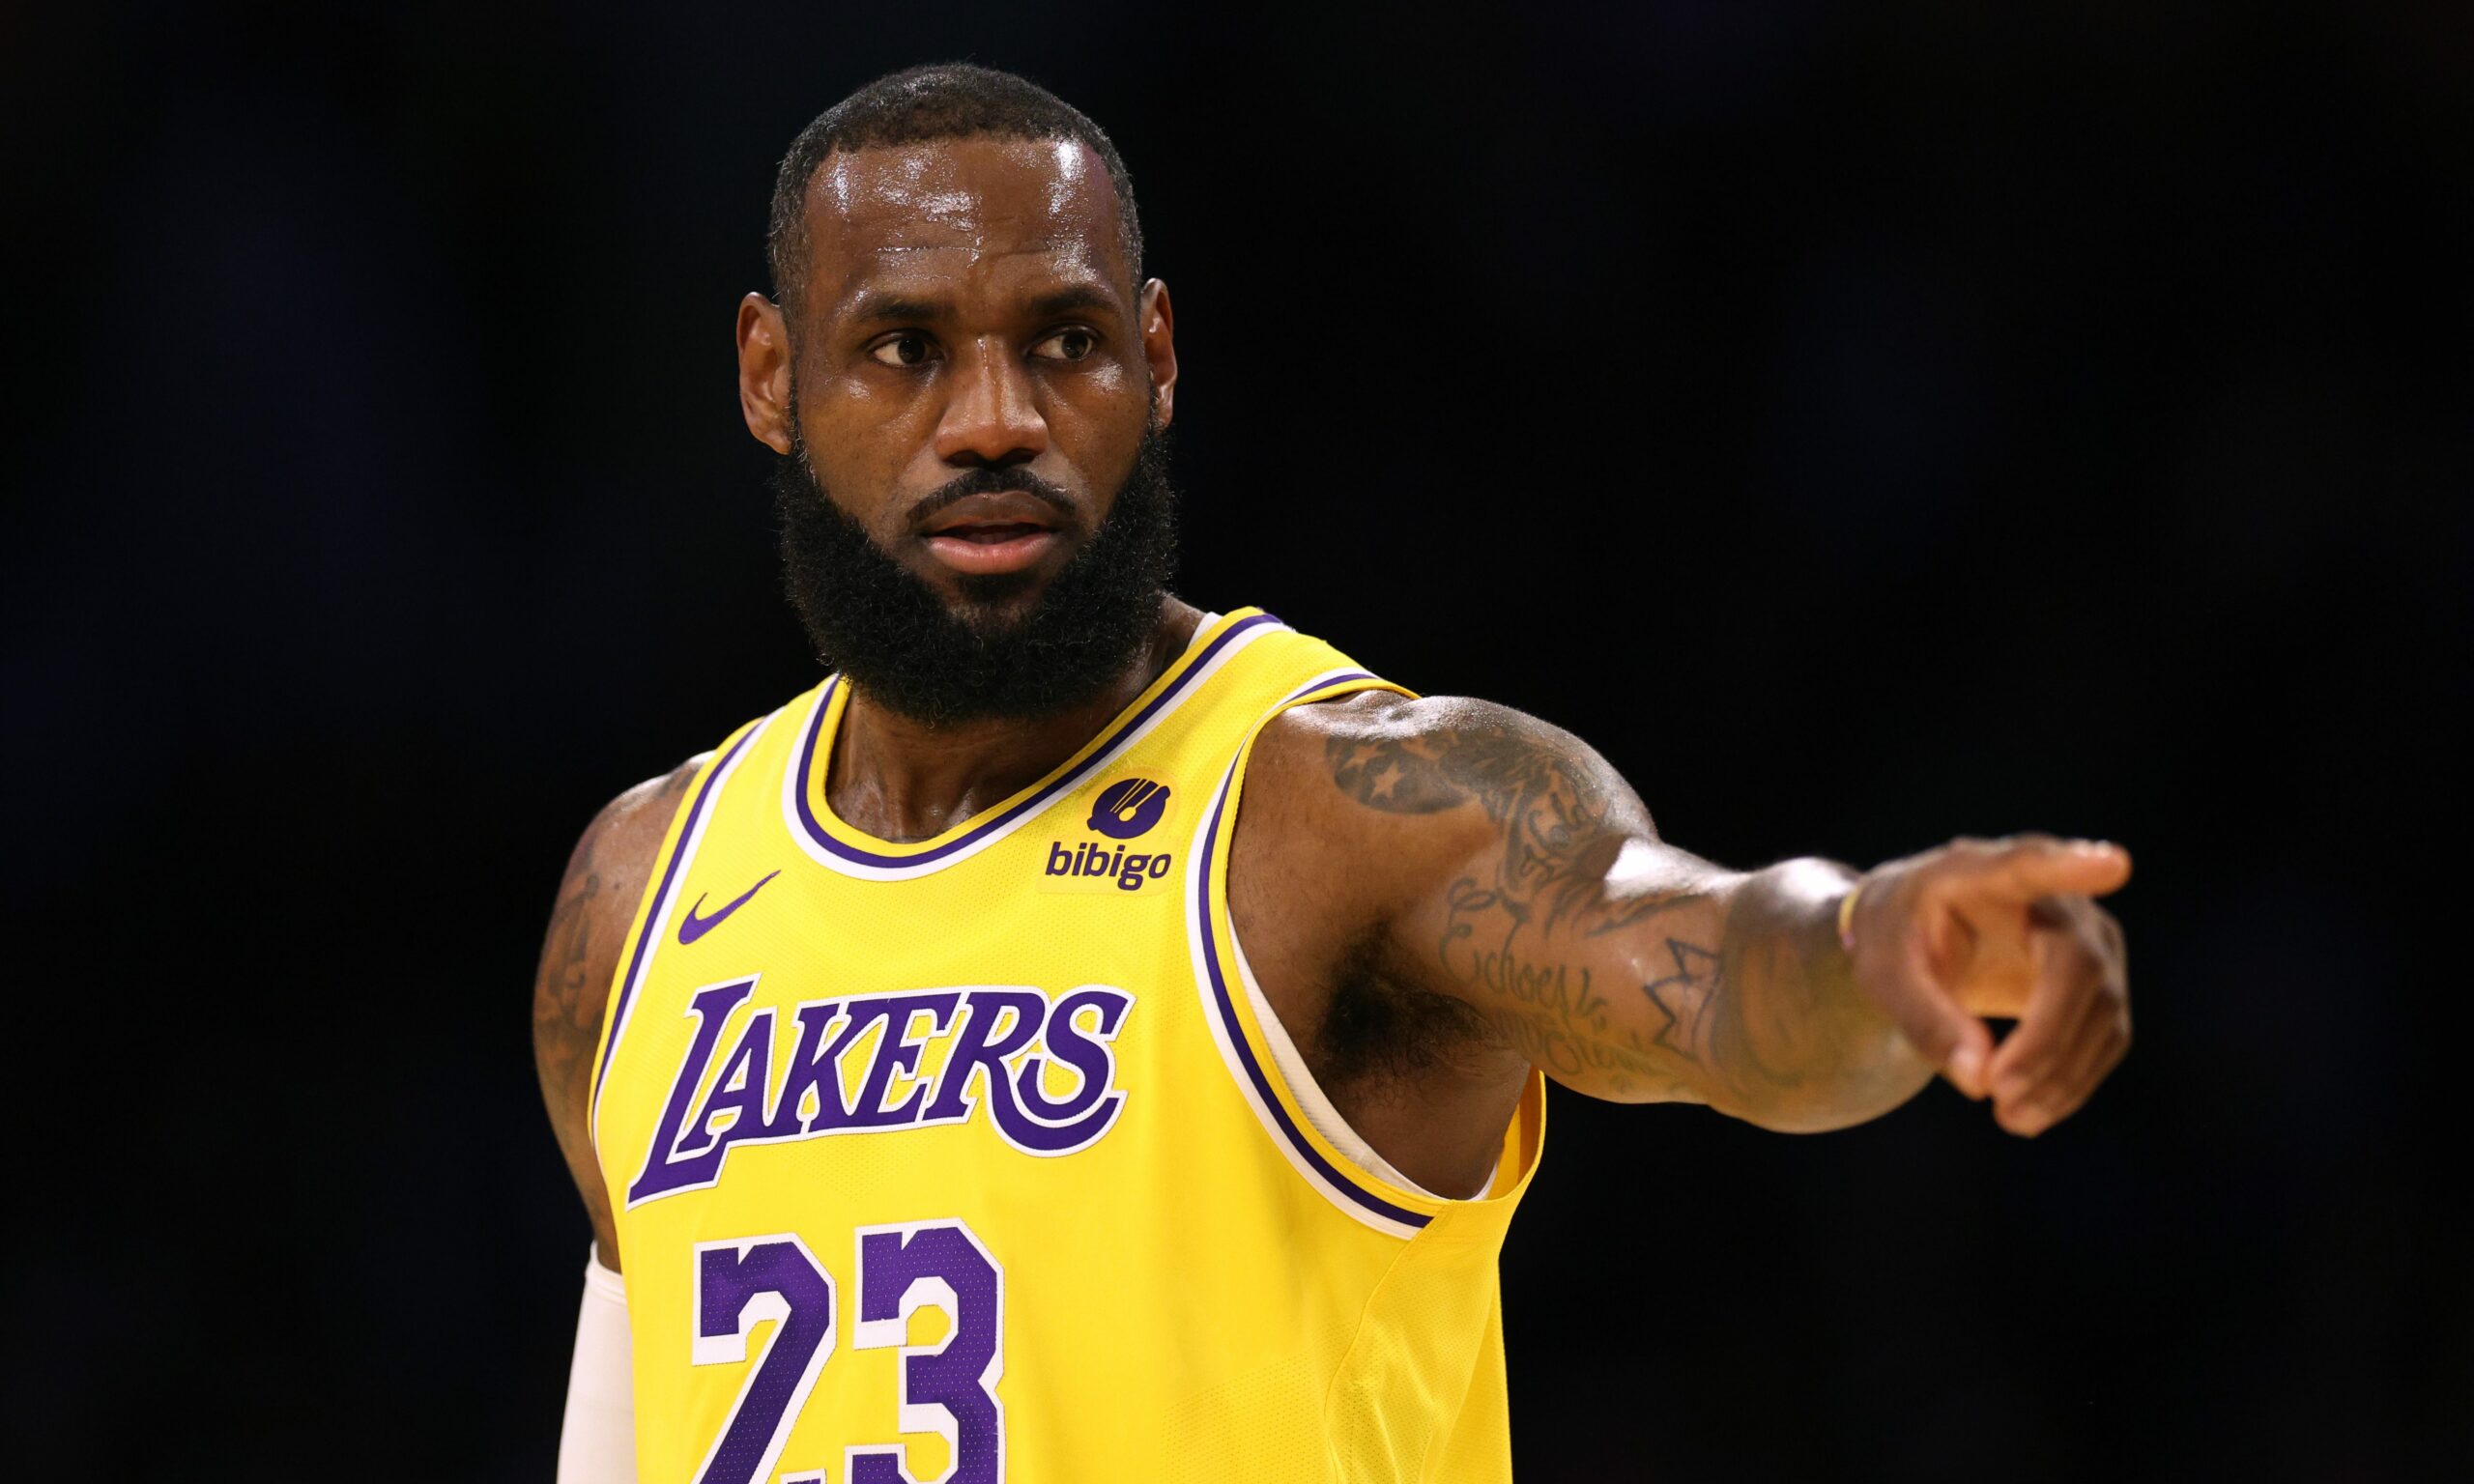 LeBron James: ‘There will be a time’ to respond to Nuggets’ trash talk